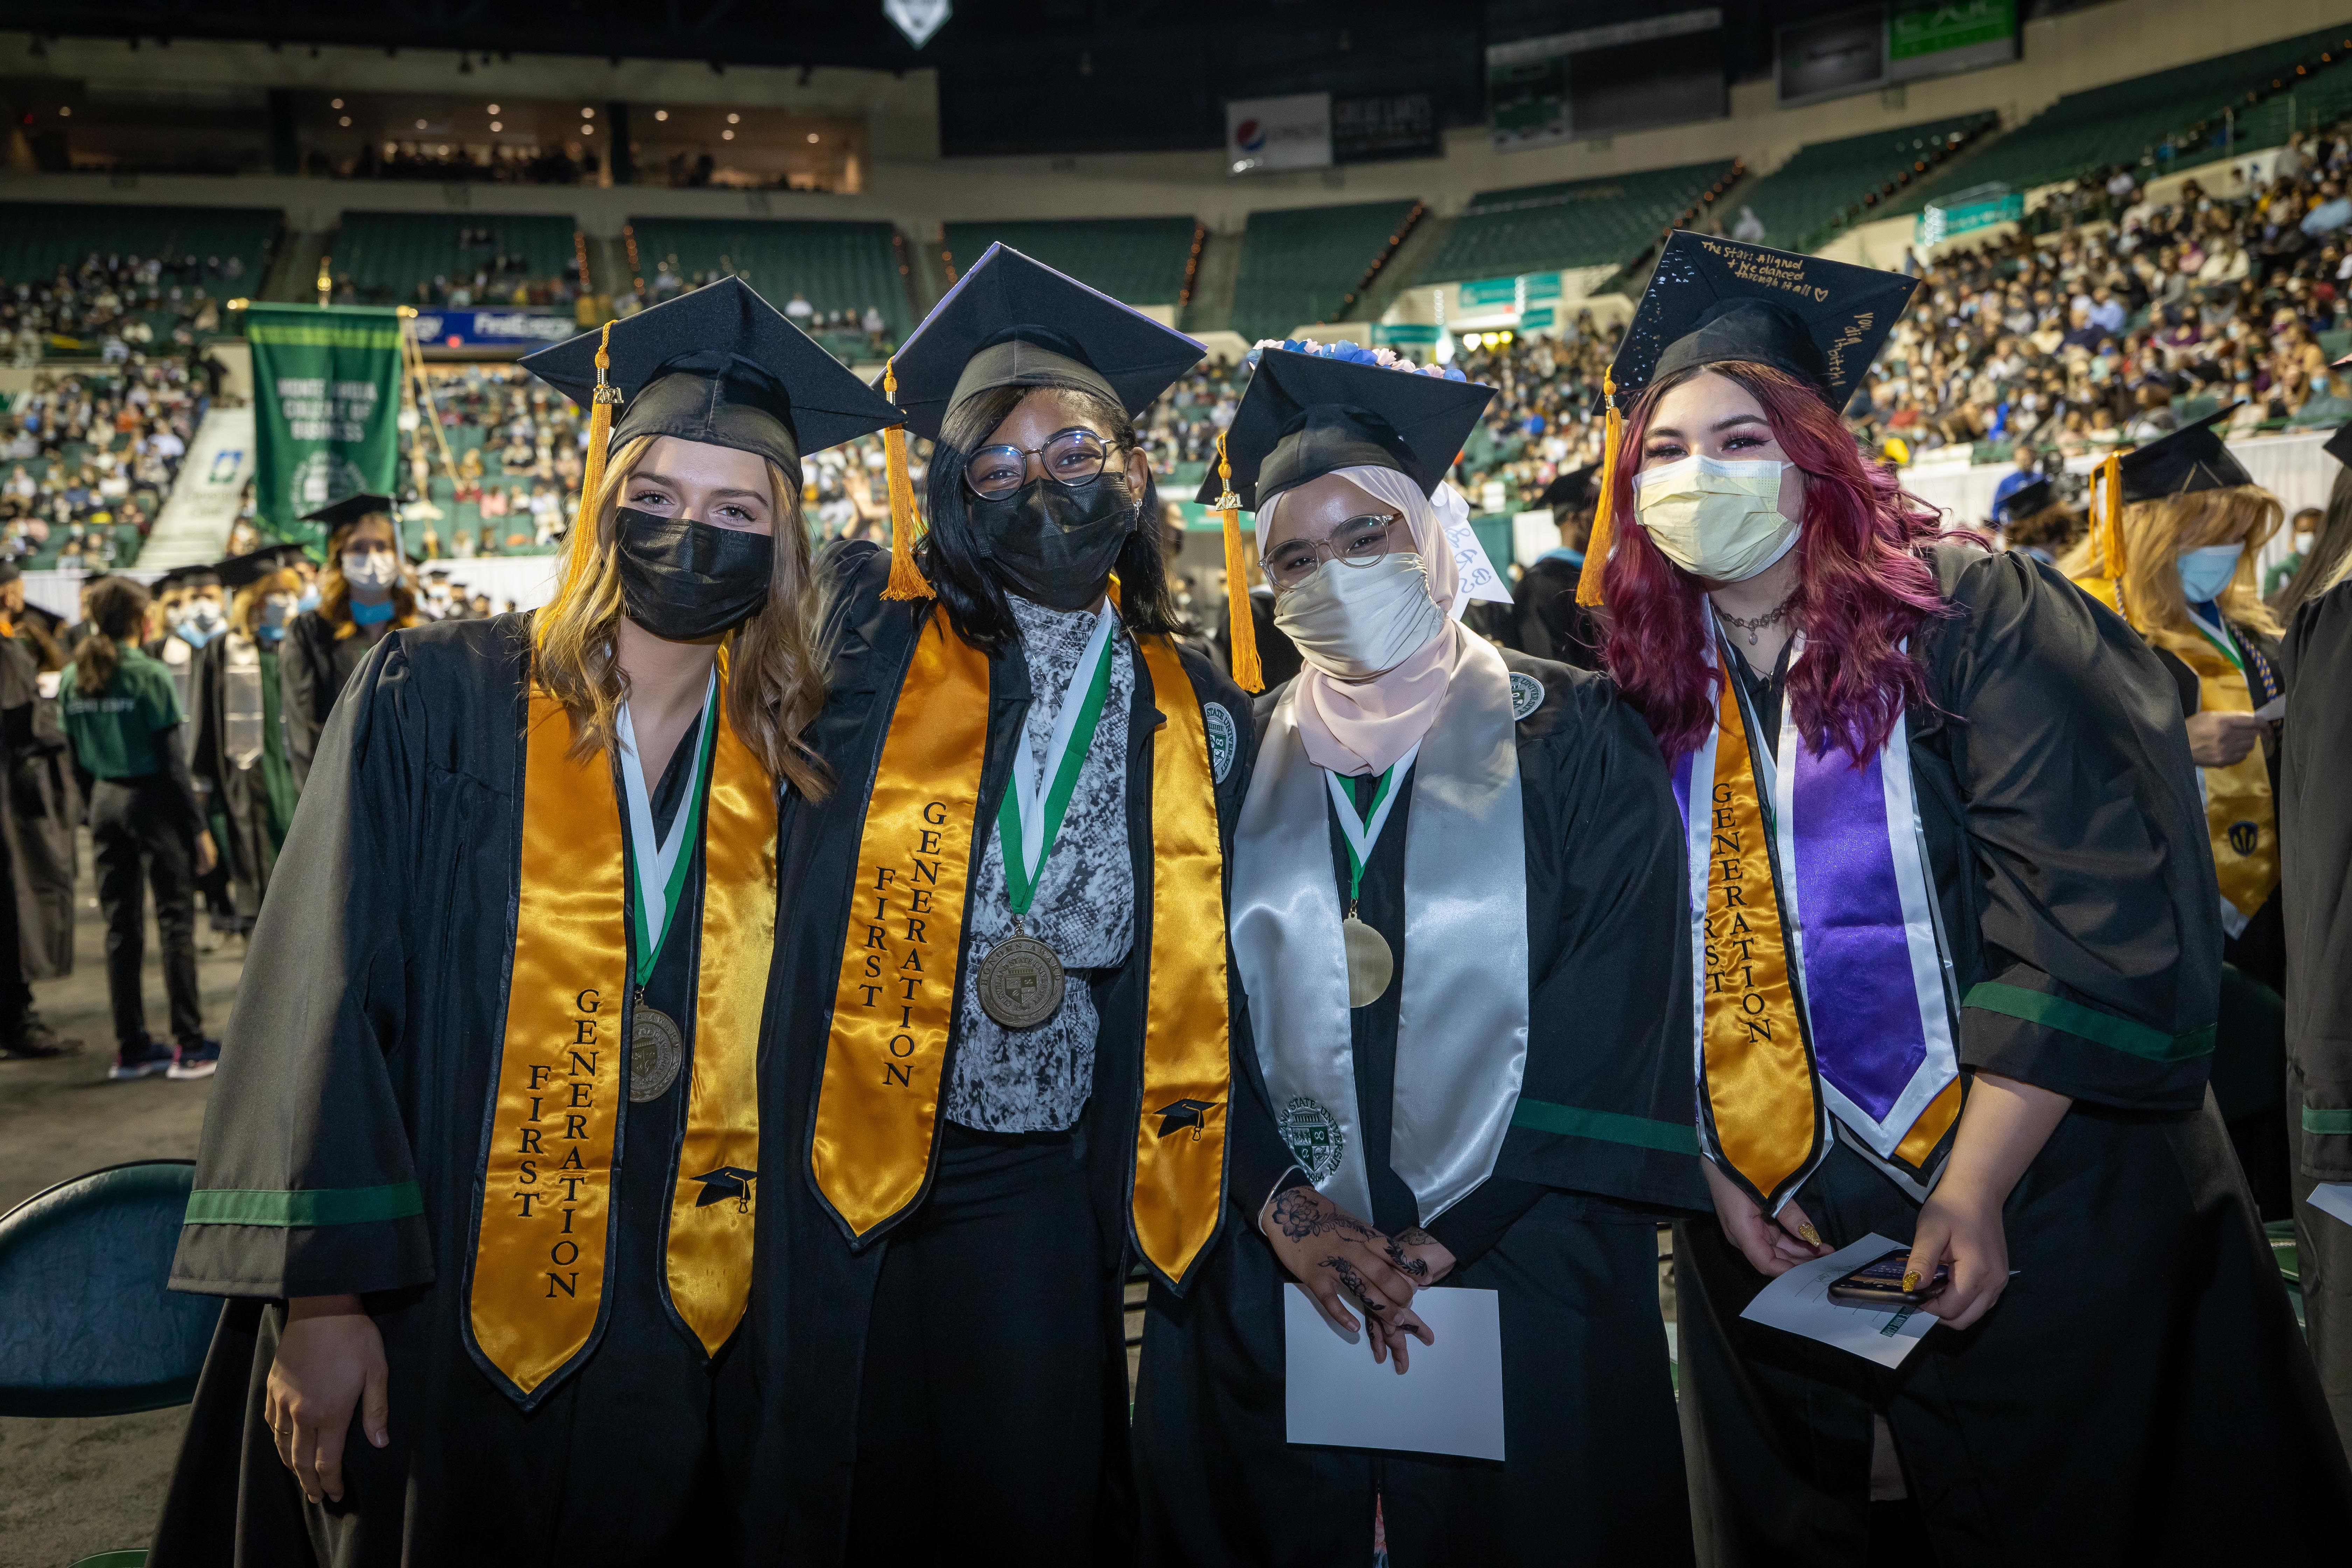 CSU Commencement Honors Fall 2021, 2020 Grads In-Person At Wolstein Center